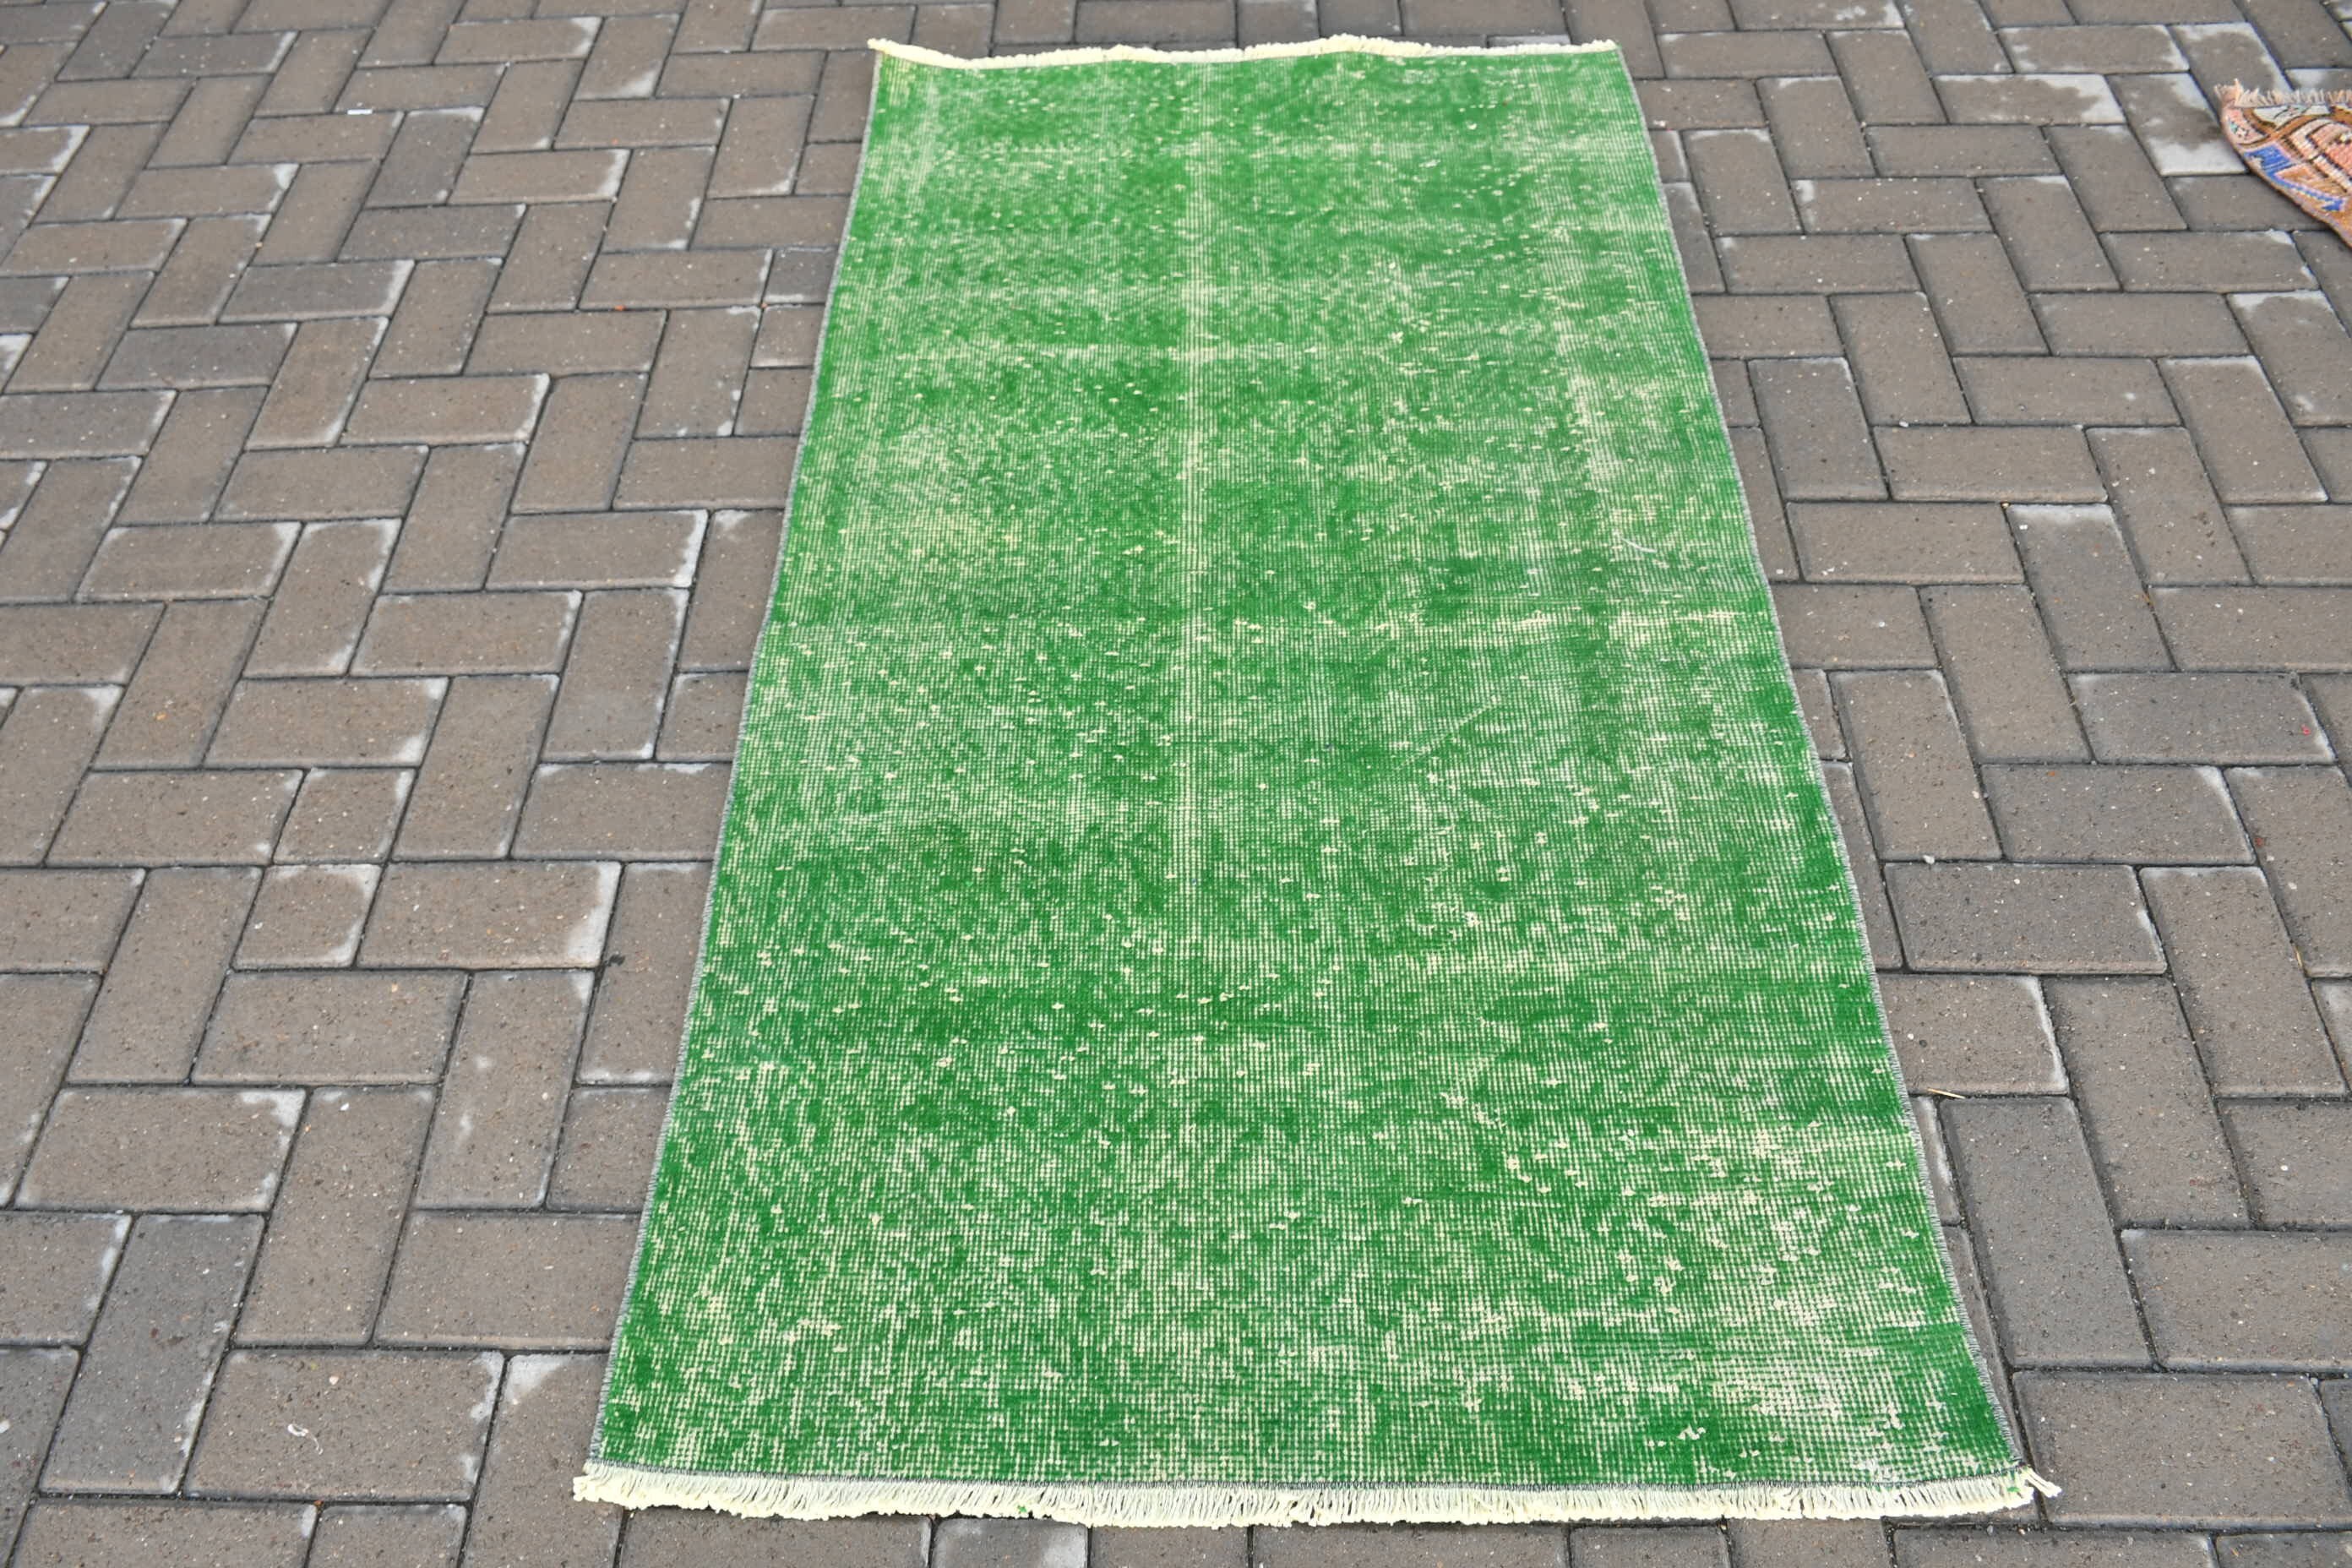 Kitchen Rug, Rugs for Kitchen, Bedroom Rug, Green Kitchen Rug, 3x5.4 ft Accent Rug, Vintage Rugs, Turkish Rugs, Entry Rugs, Wool Rug